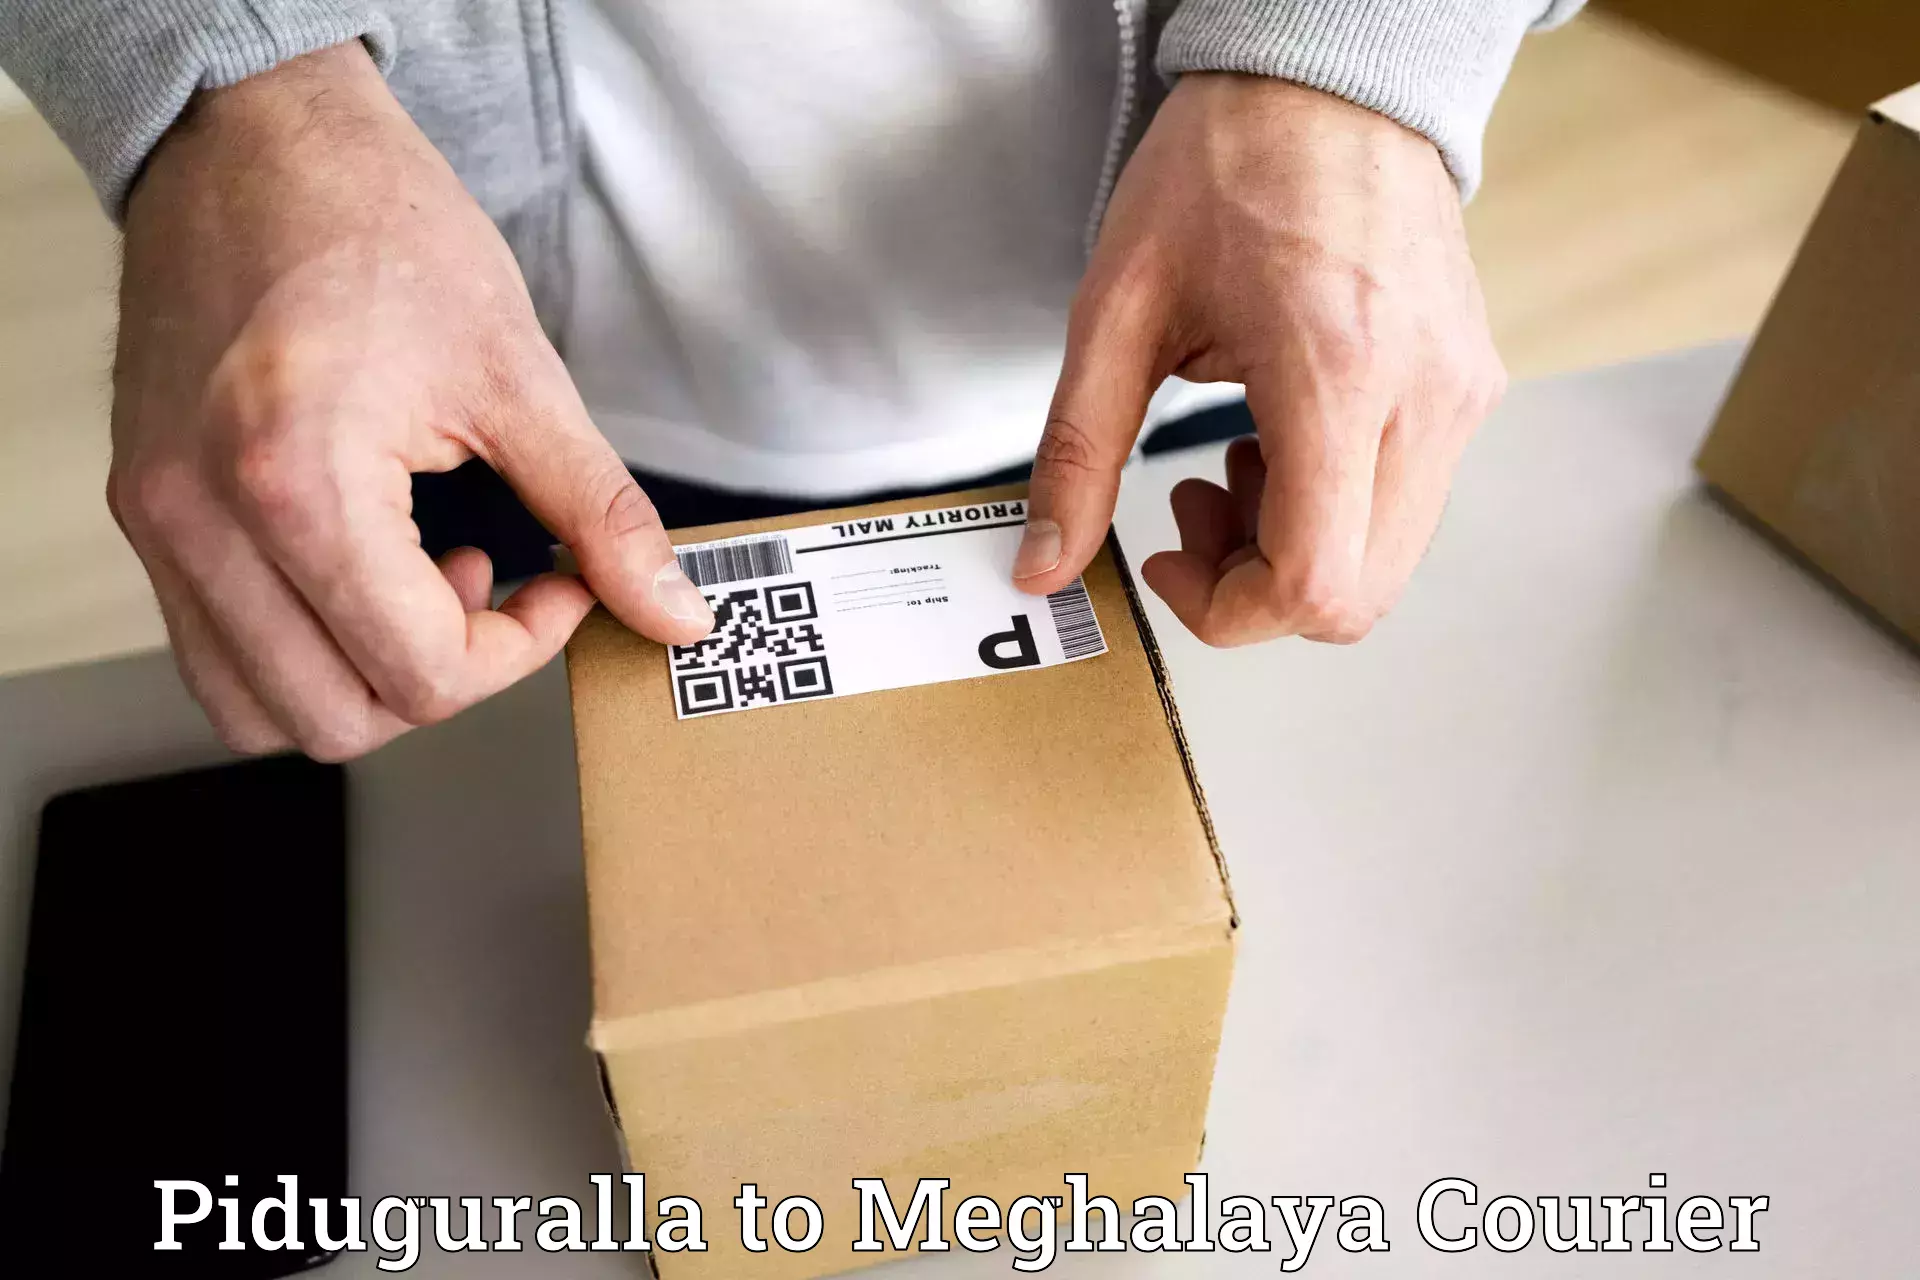 Cash on delivery service Piduguralla to Dkhiah West